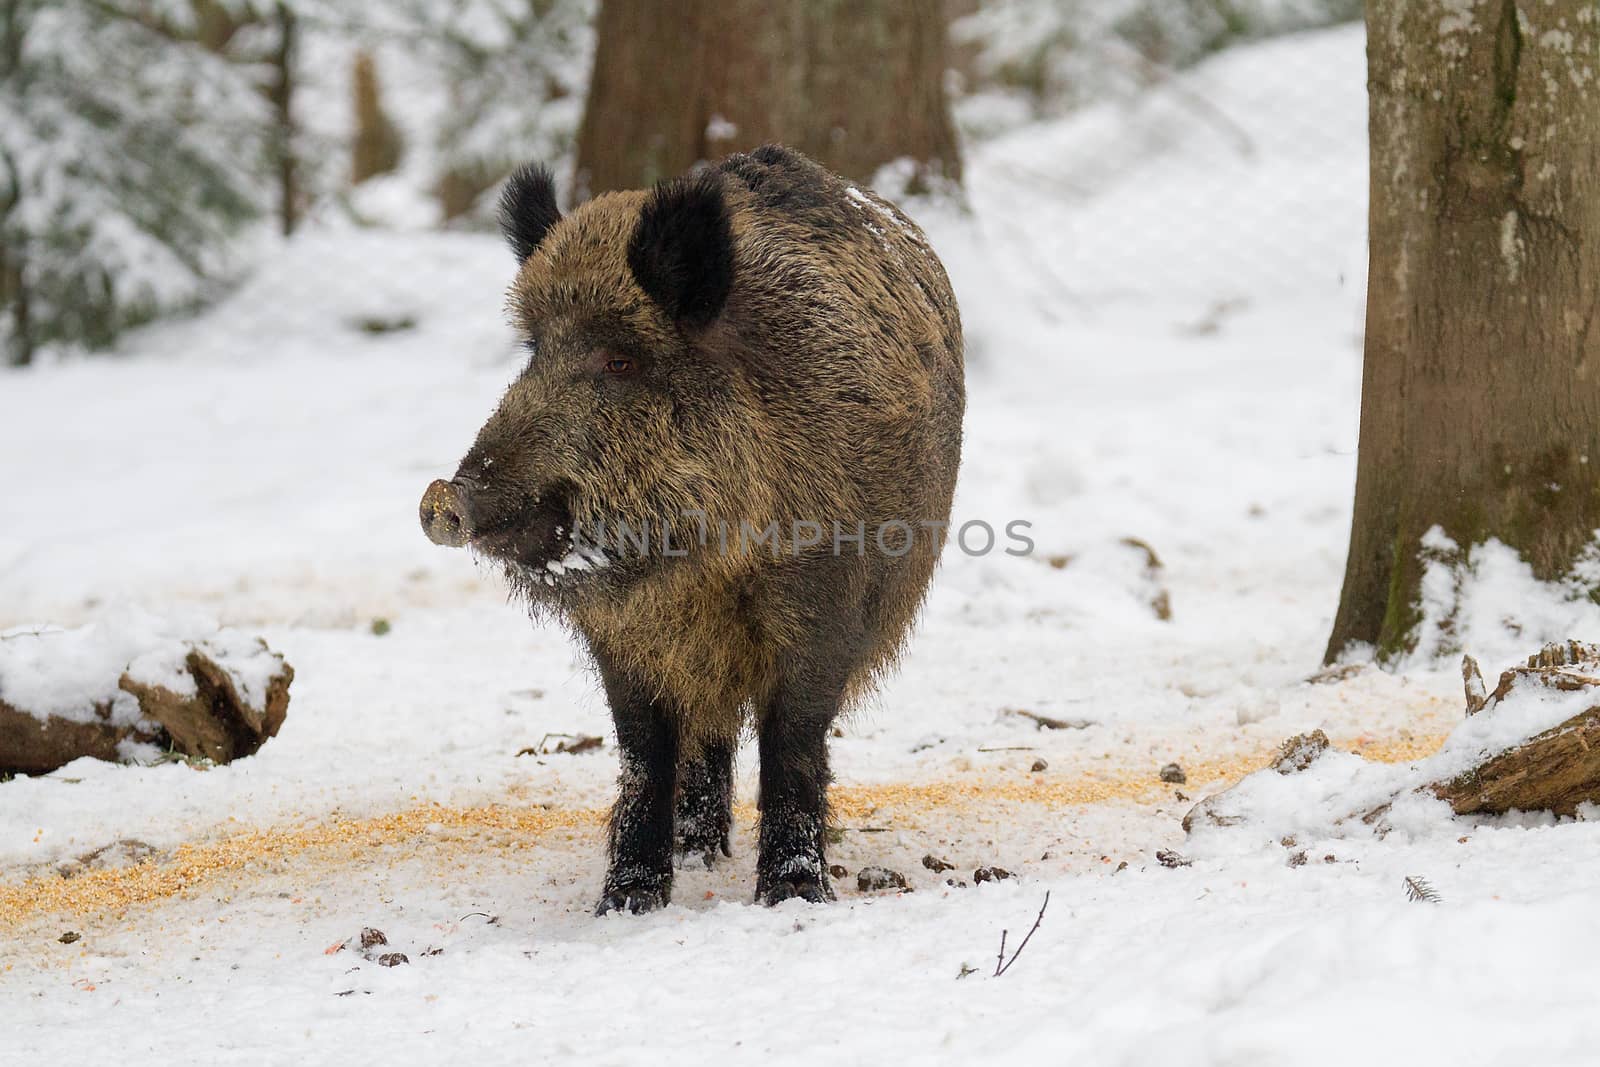 Wild boar (Sus scrofa) on the snow in the forest by Simon02